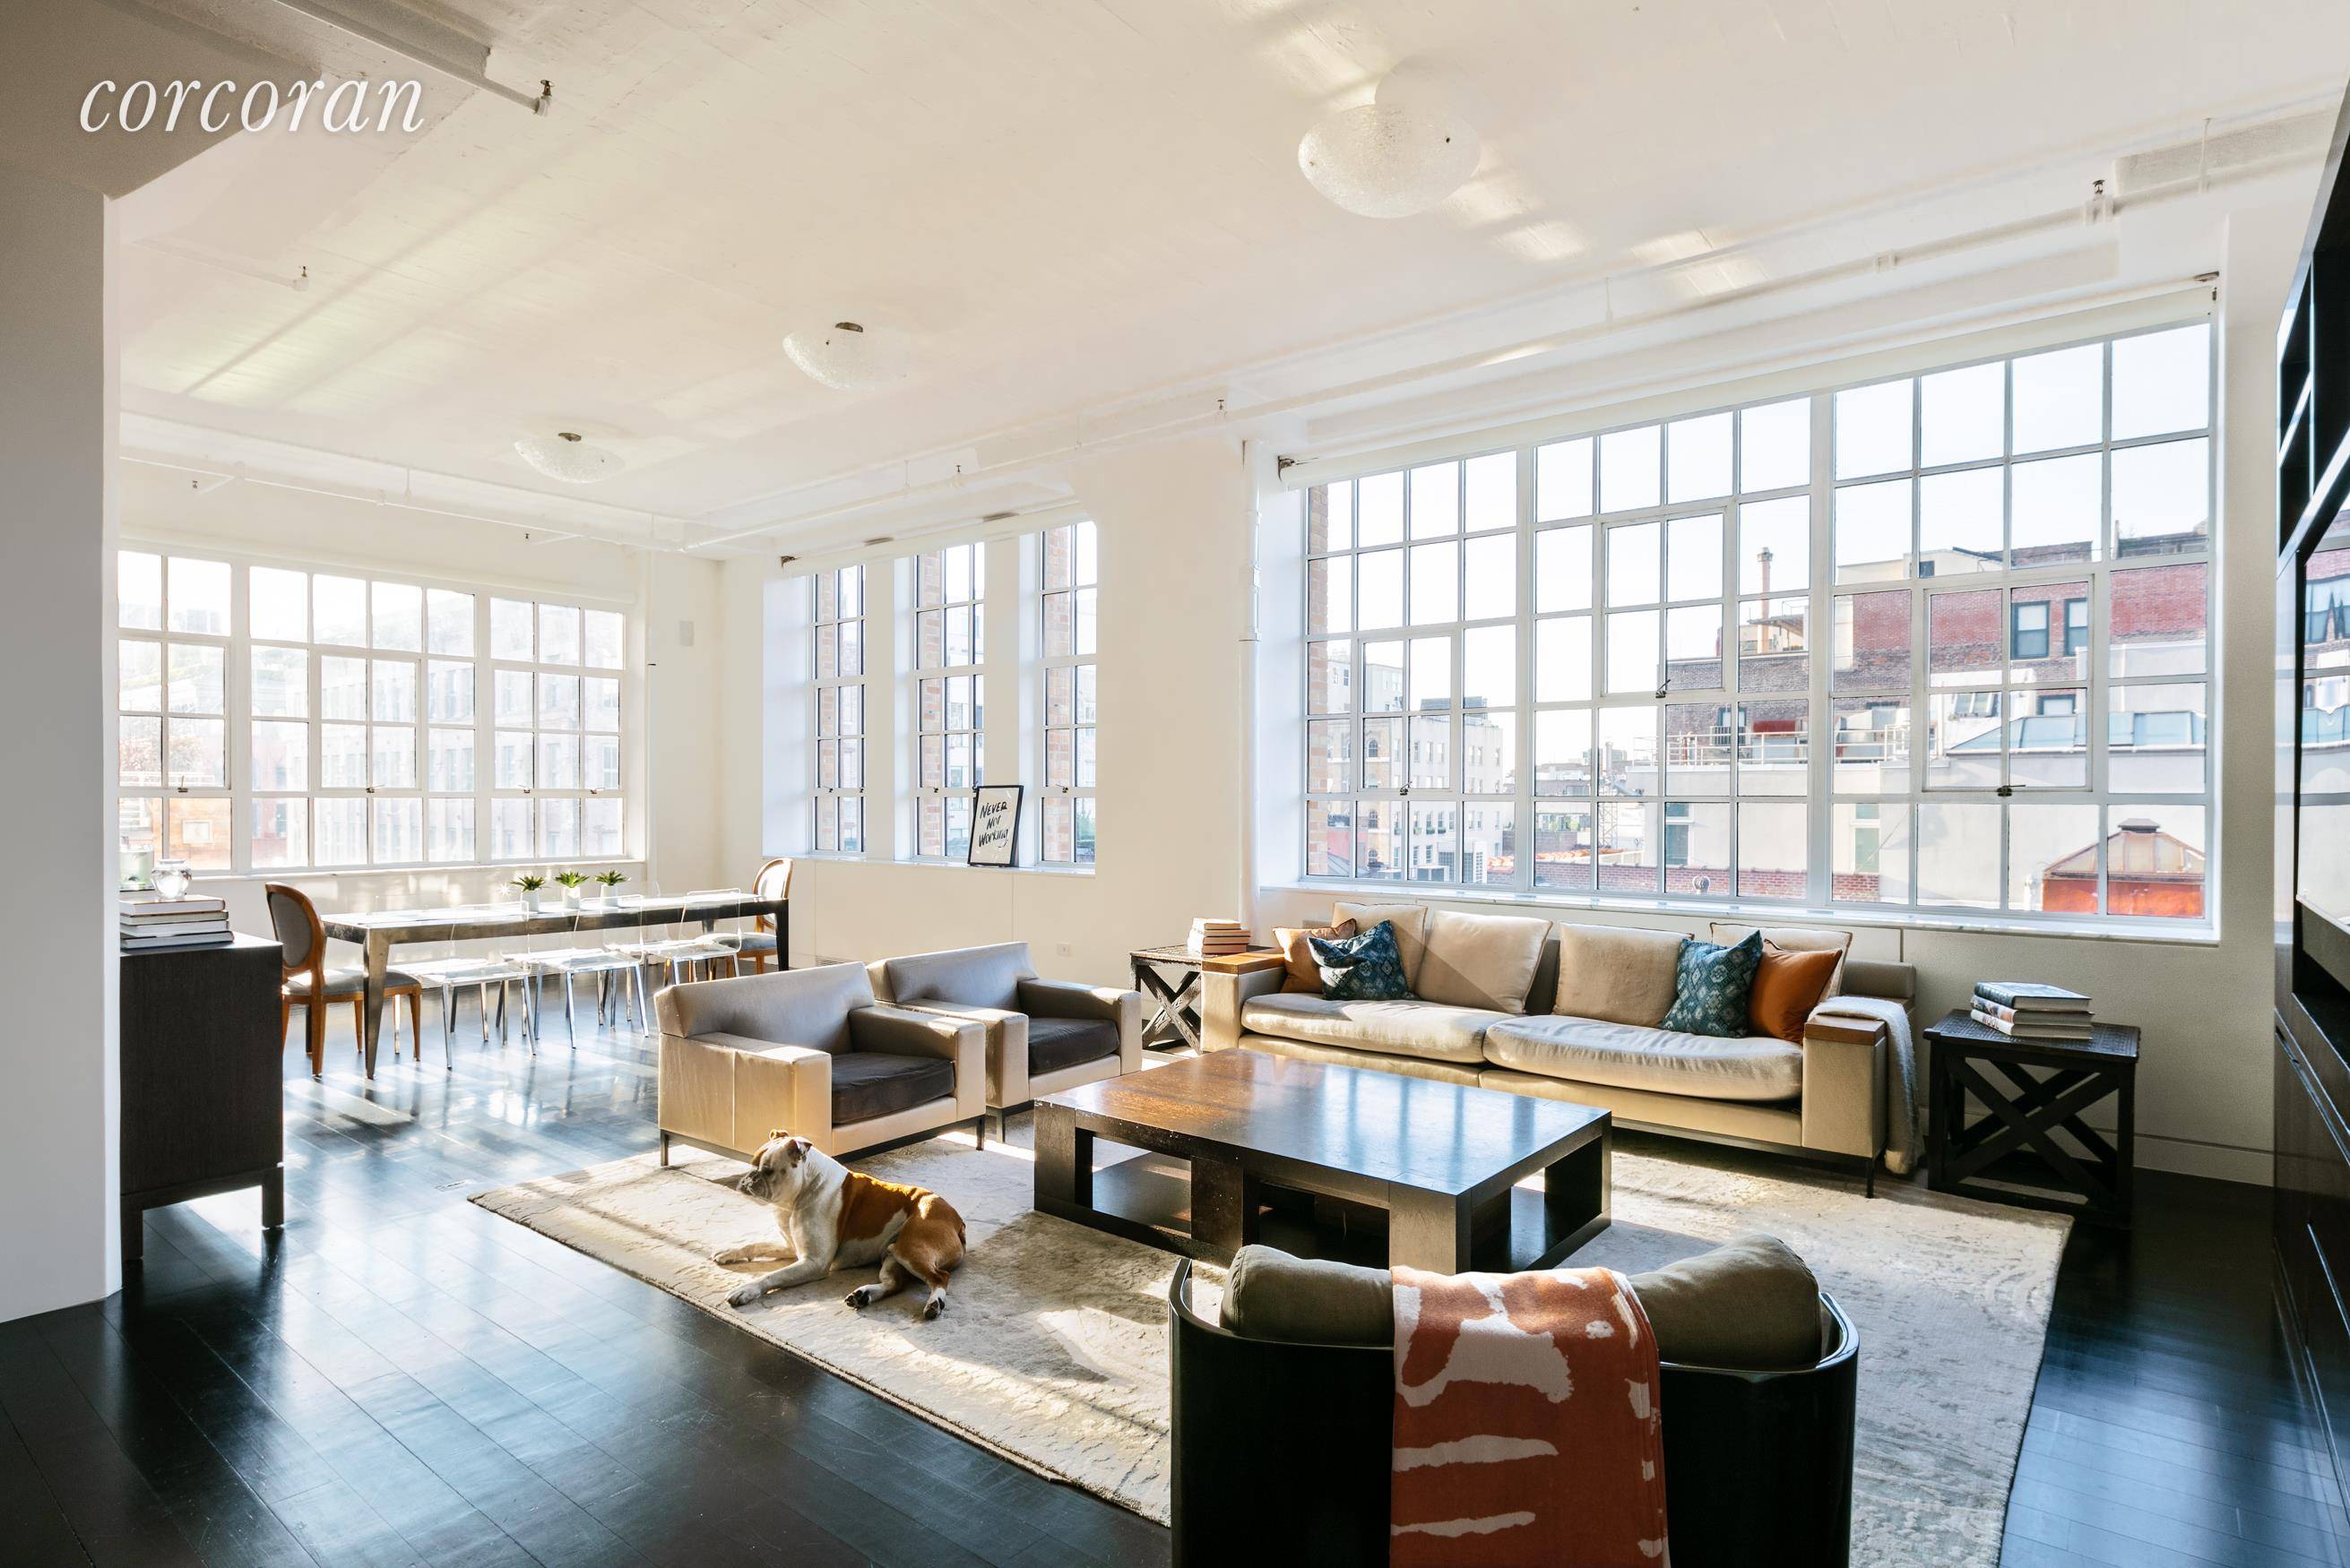 Experience spectacular true loft living in this palatial four bedroom, three and a half bathroom residence in a TriBeCa industrial Art Deco condominium.